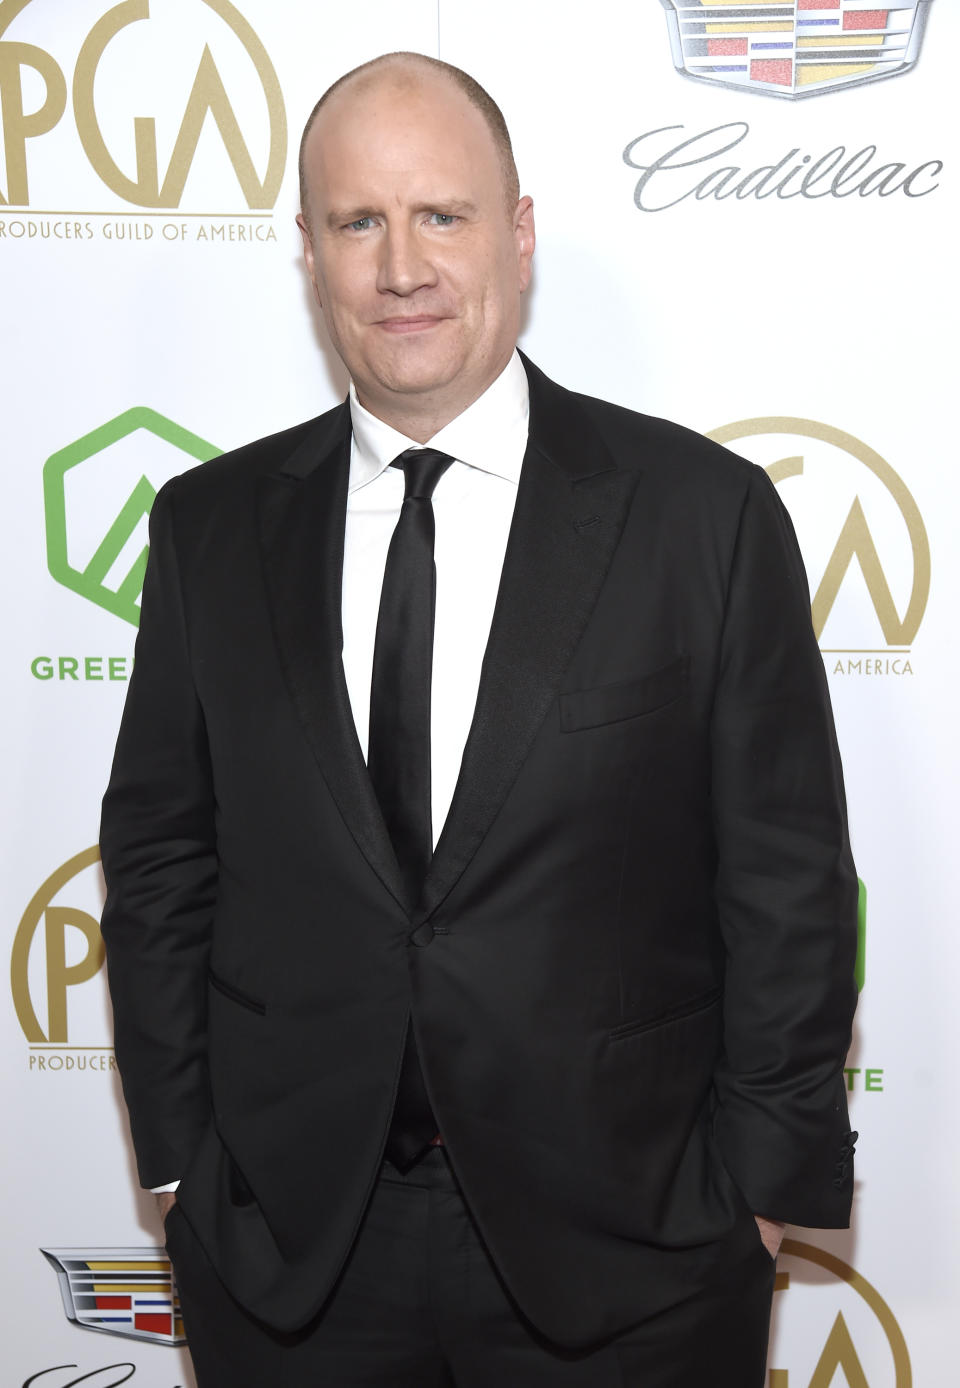 Kevin Feige arrives at the Producers Guild Awards on Saturday, Jan. 19, 2019, at the Beverly Hilton Hotel in Beverly Hills, Calif. (Photo by Chris Pizzello/Invision/AP)